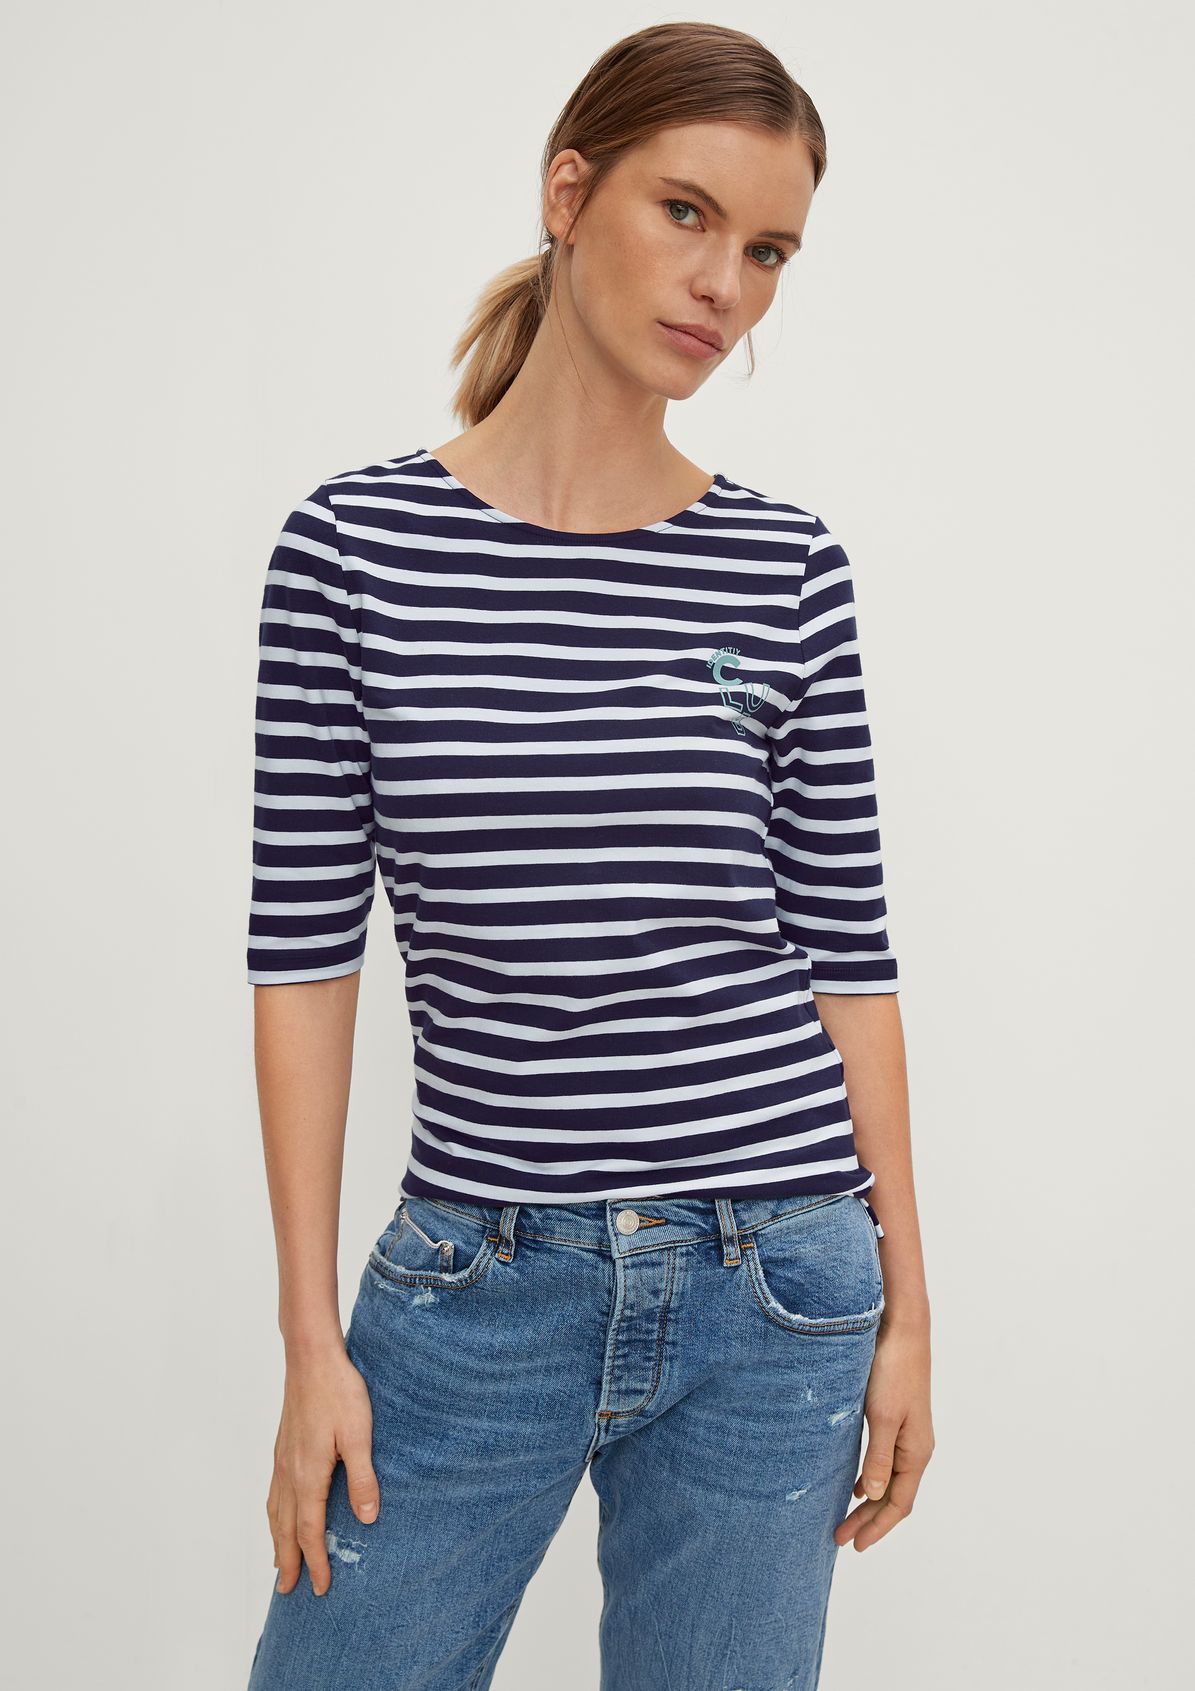 Striped T-shirt from comma